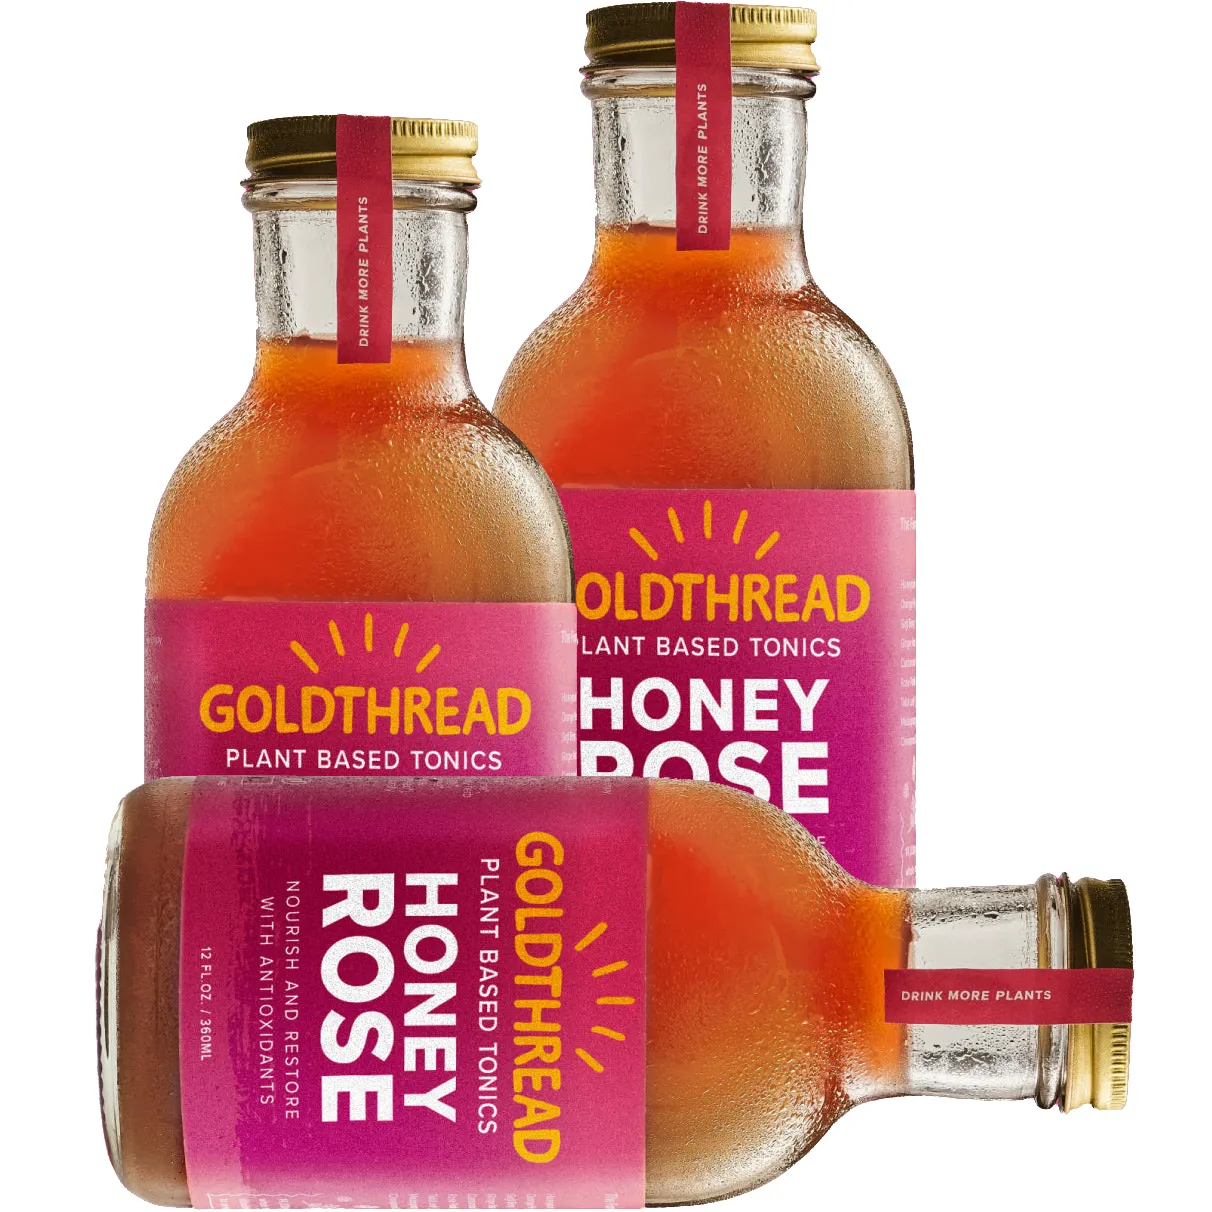 Free Plant-Based Tonics By Goldthread